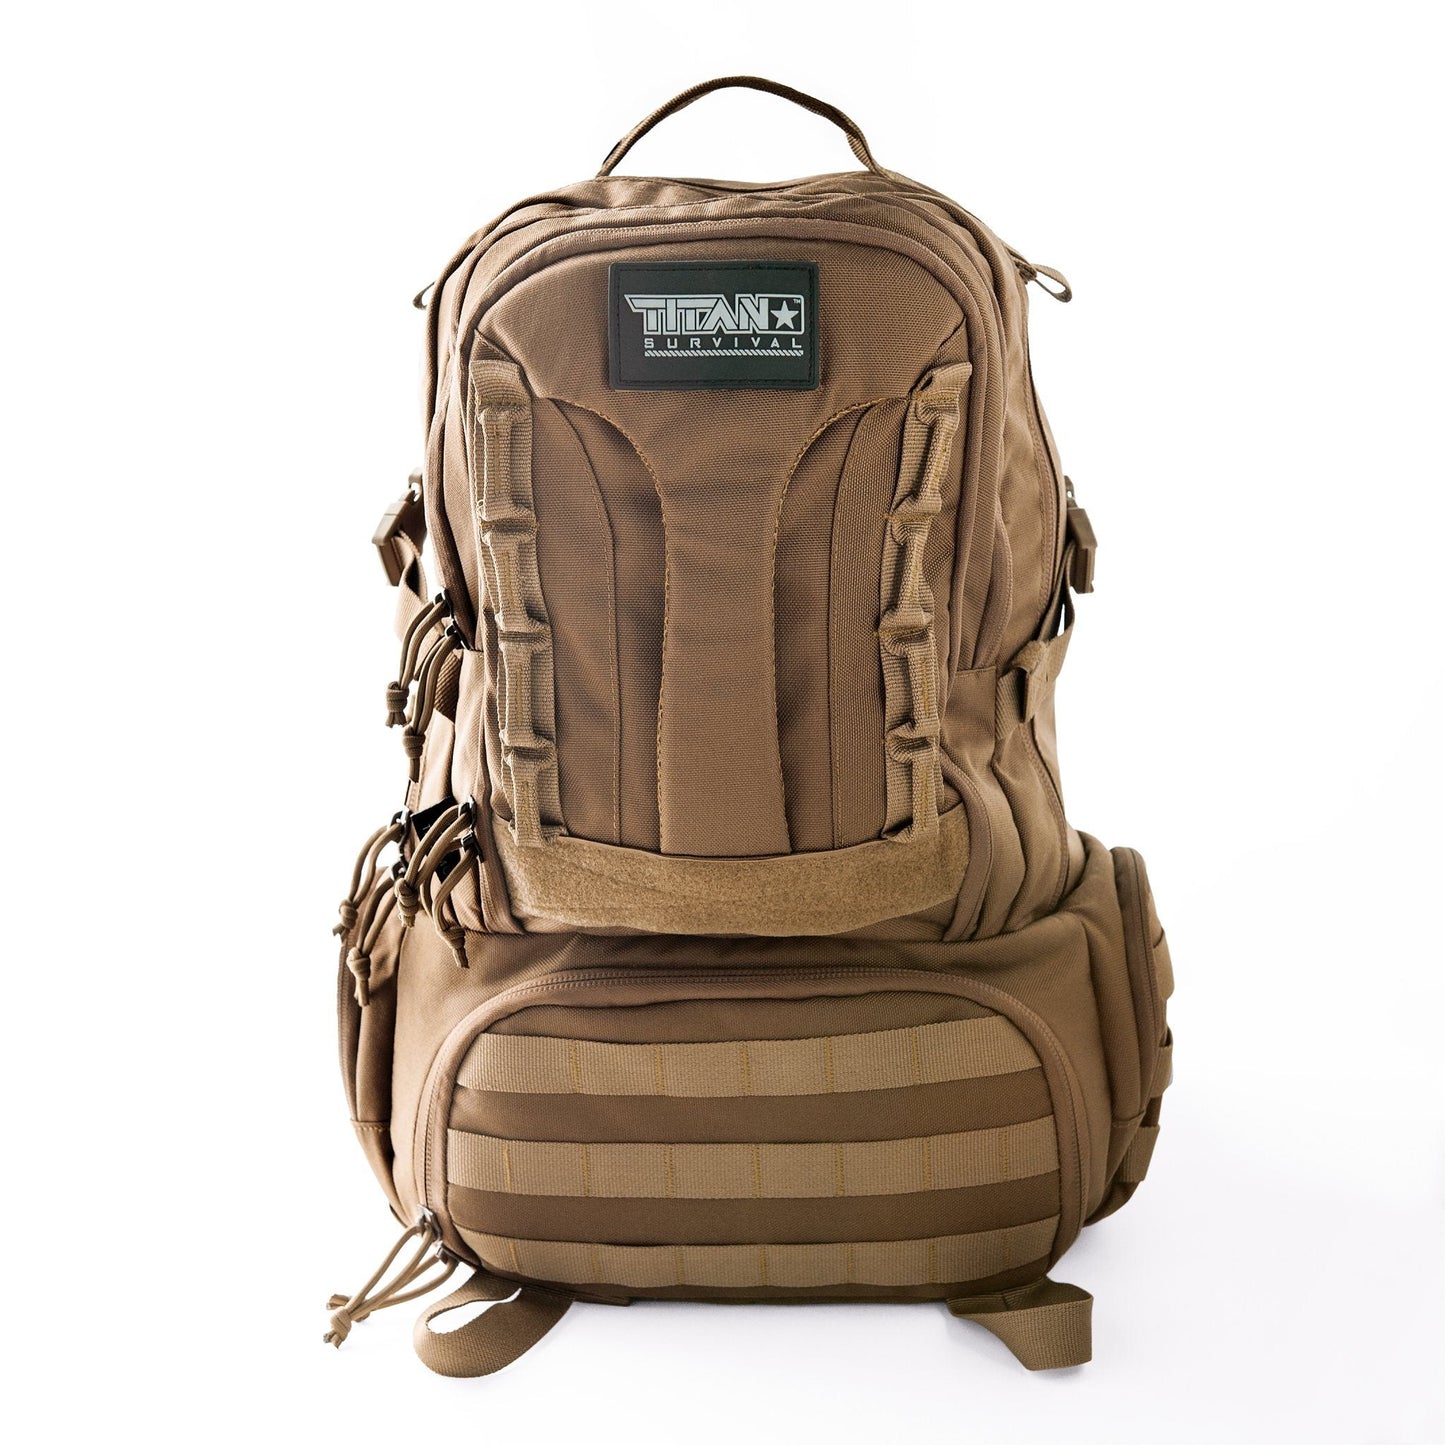 BC50 50L 72-Hour Tactical Backpack in tan color with visible branding